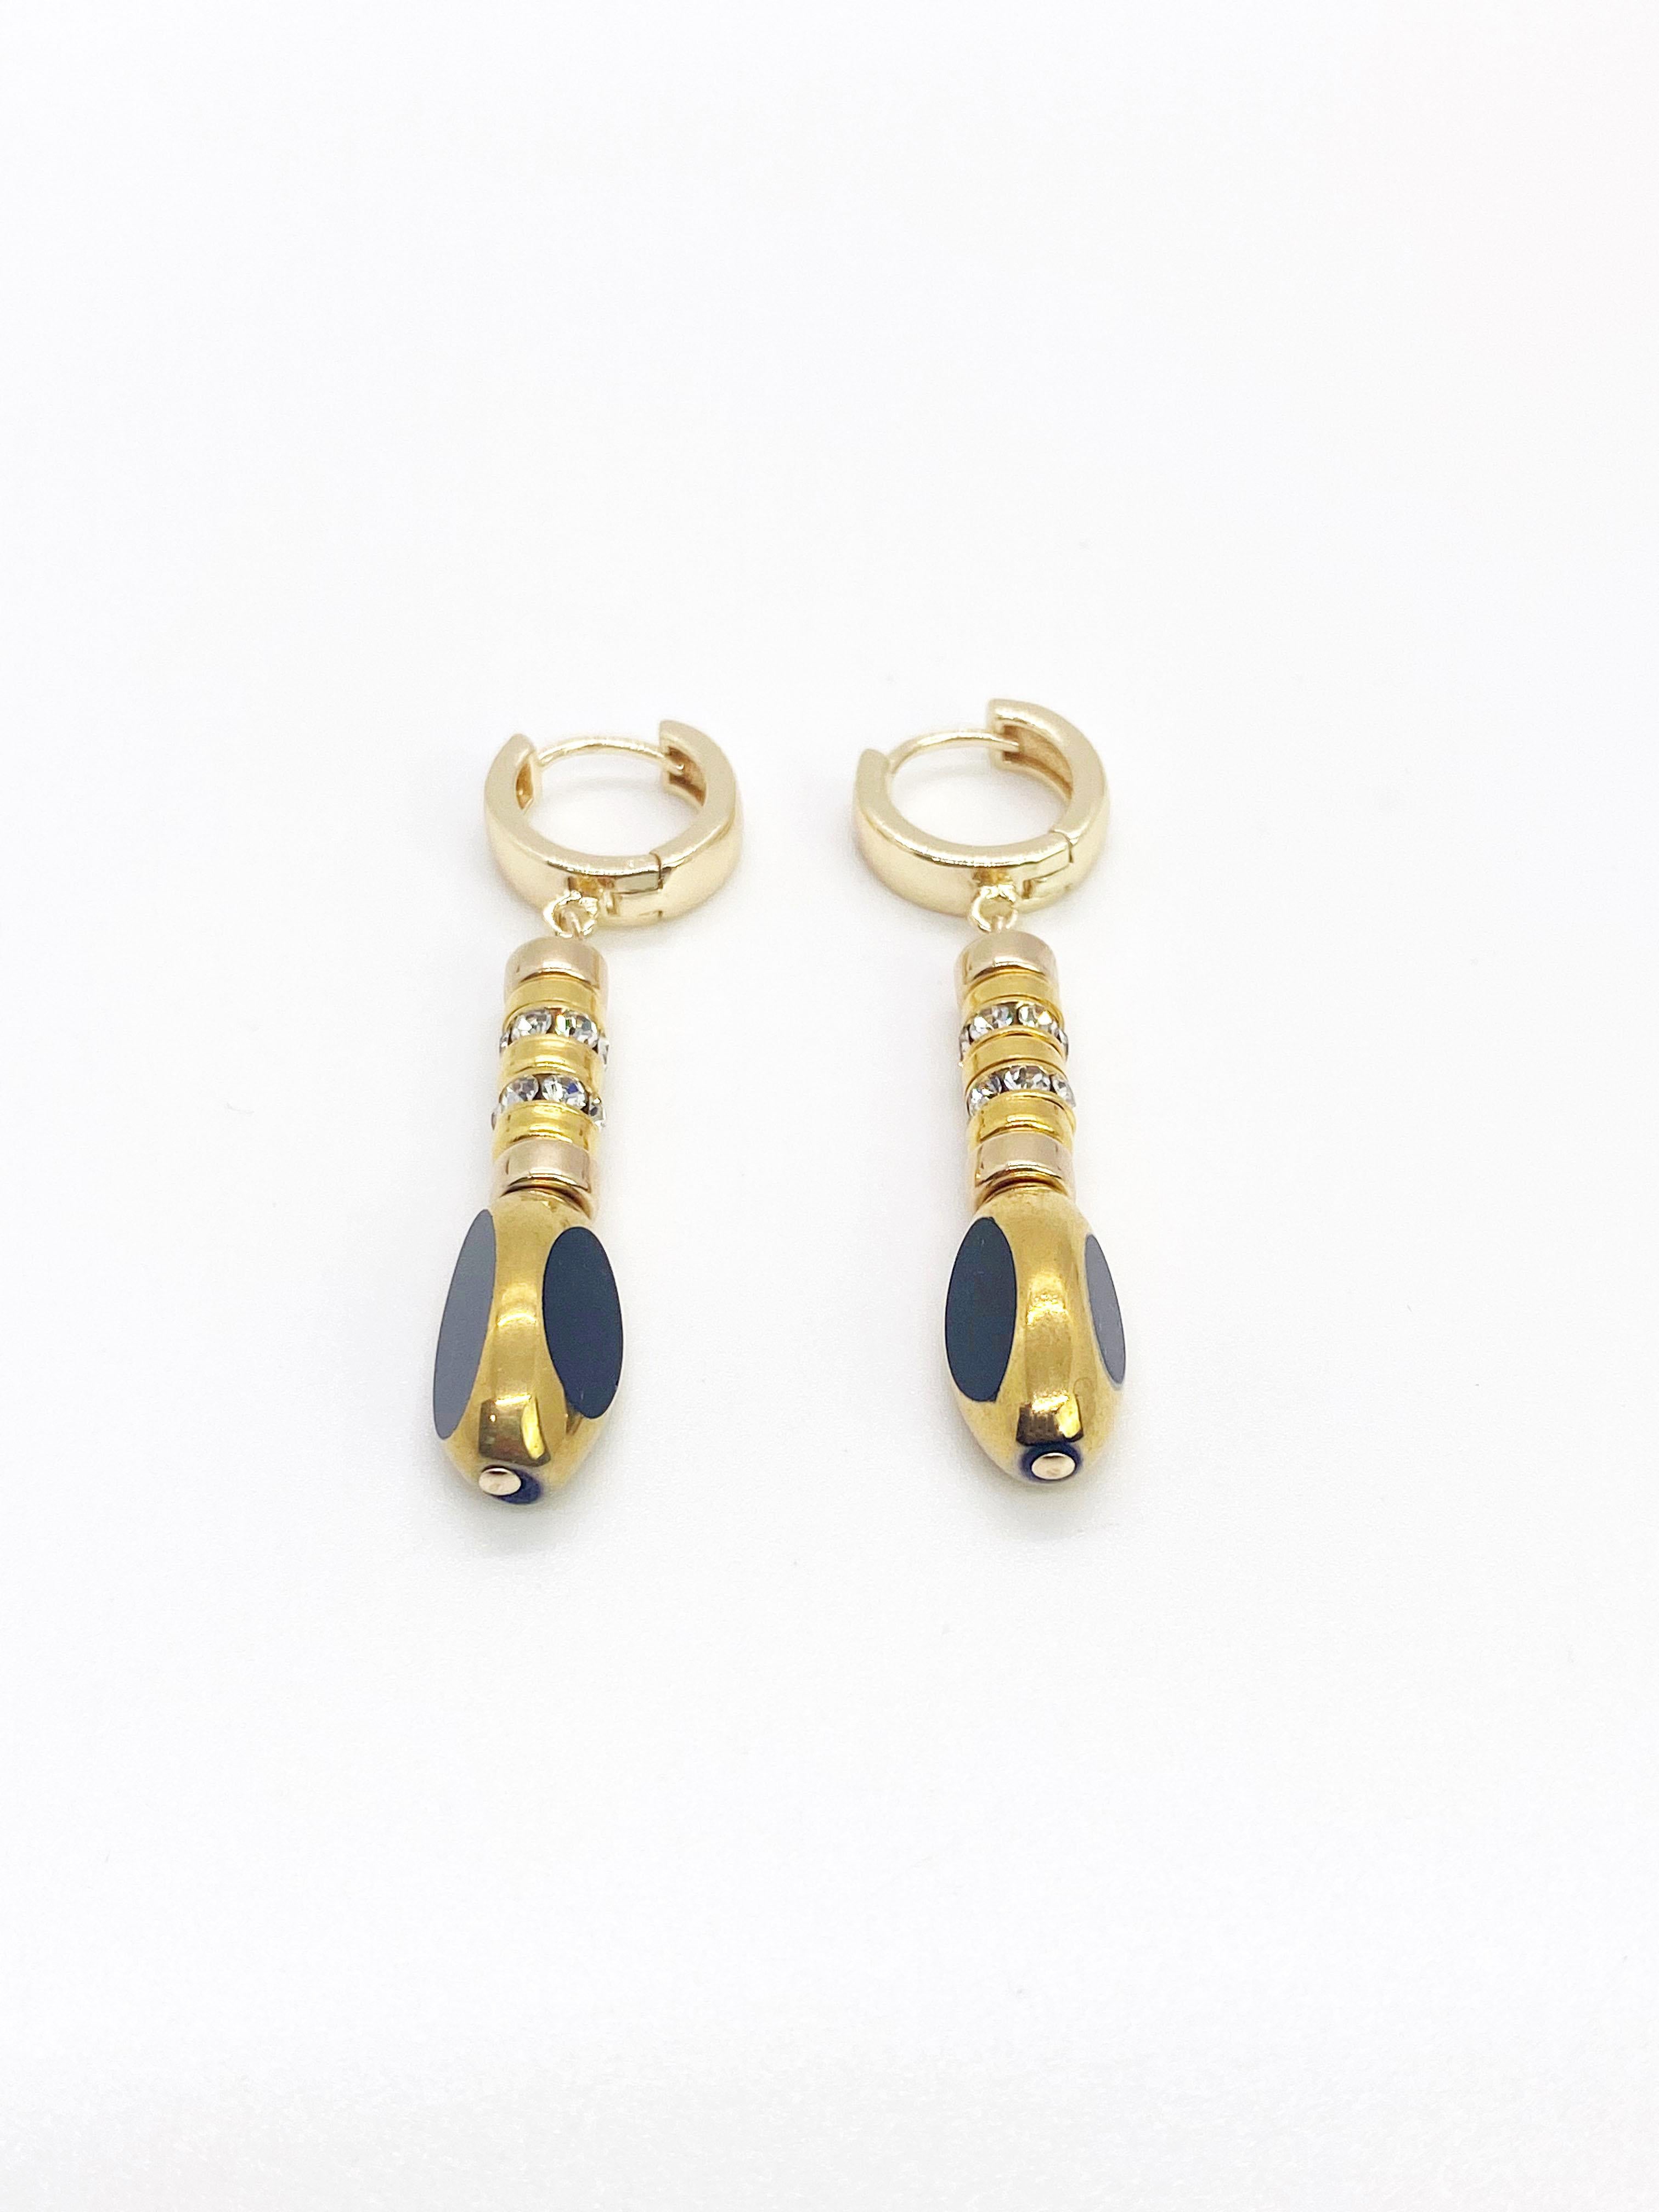 A little edgy and a lot of fun. The earrings consist of black vintage German glass beads along with rhinestones and gold filled rondelle beads. The German vintage glass beads are framed with 24K gold. The earrings are then finished with 18K gold